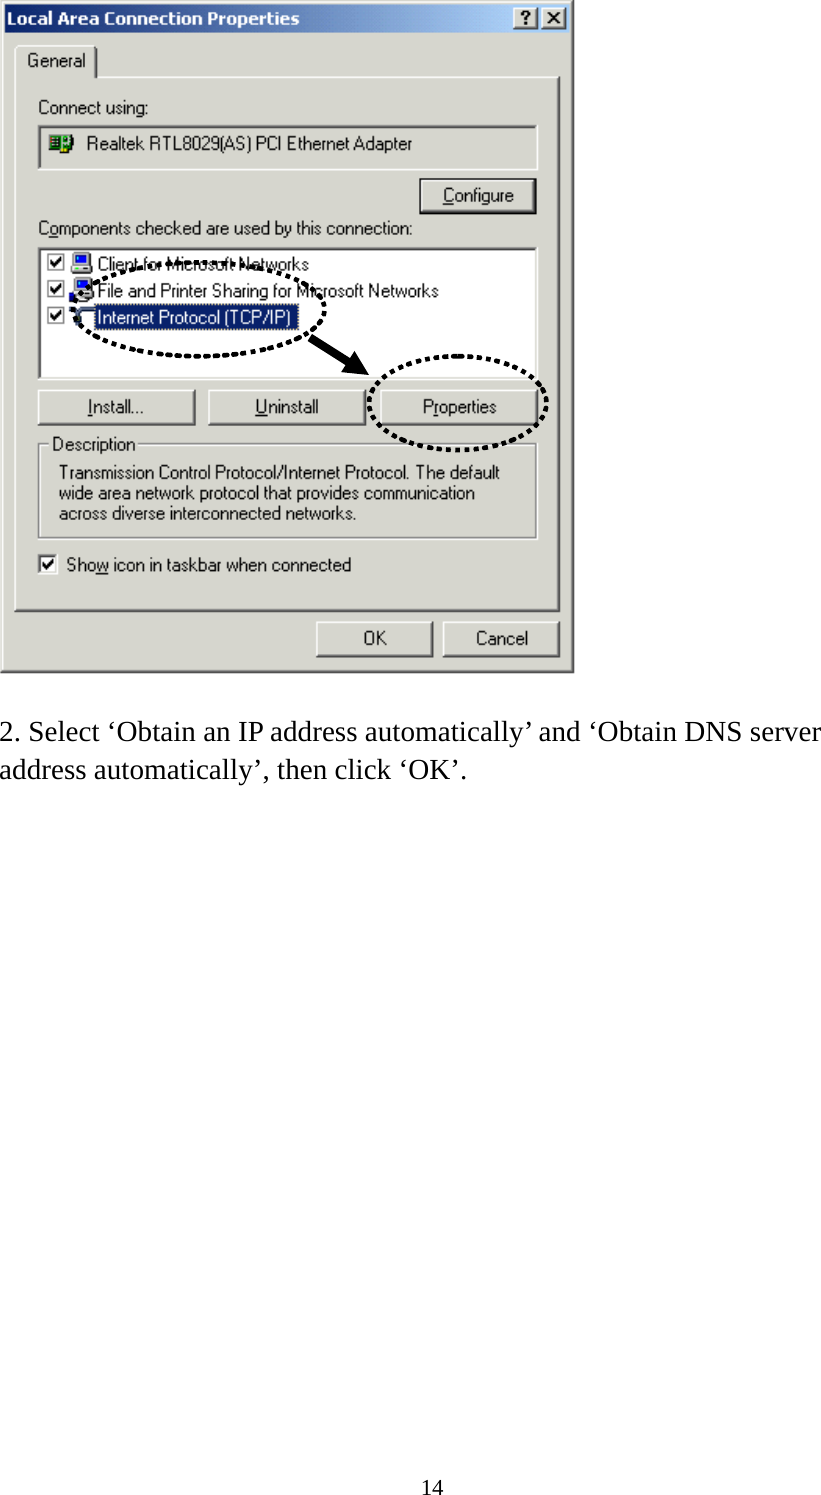 14   2. Select ‘Obtain an IP address automatically’ and ‘Obtain DNS server address automatically’, then click ‘OK’.  